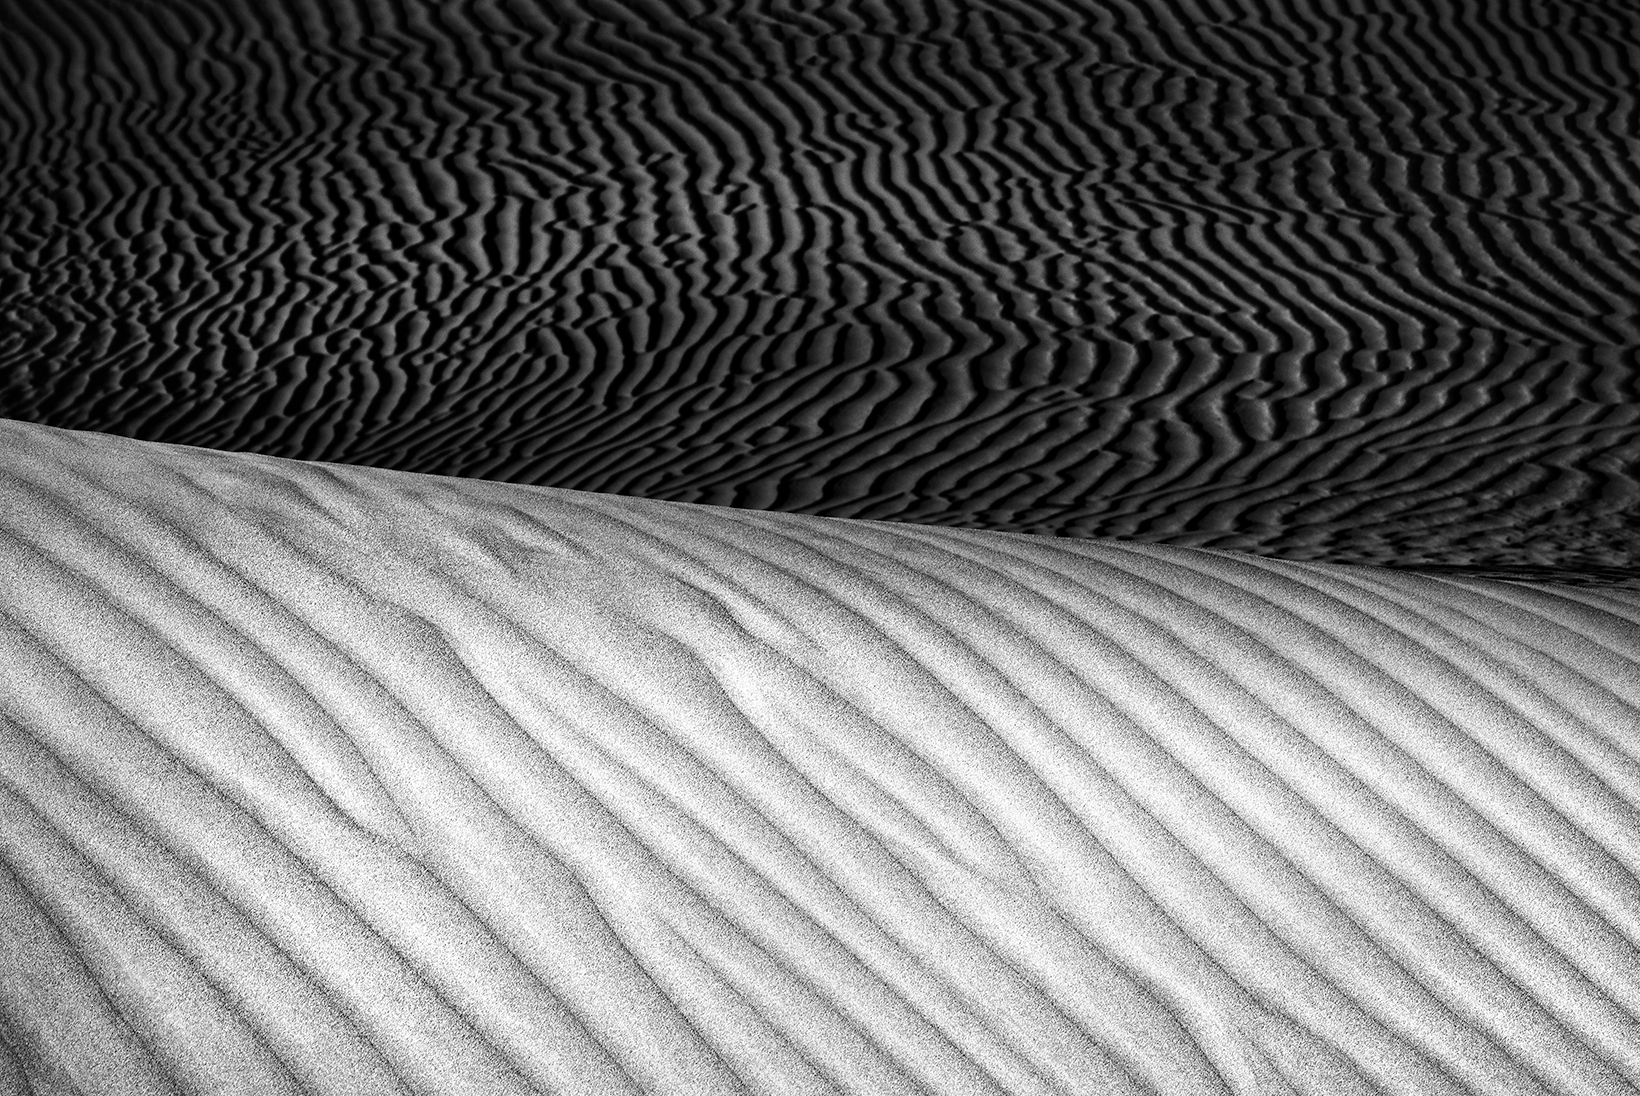 A landscape portrait of Mesquite Flat Sand Dunes in Death Valley National Park. Waves of sand fill the image.